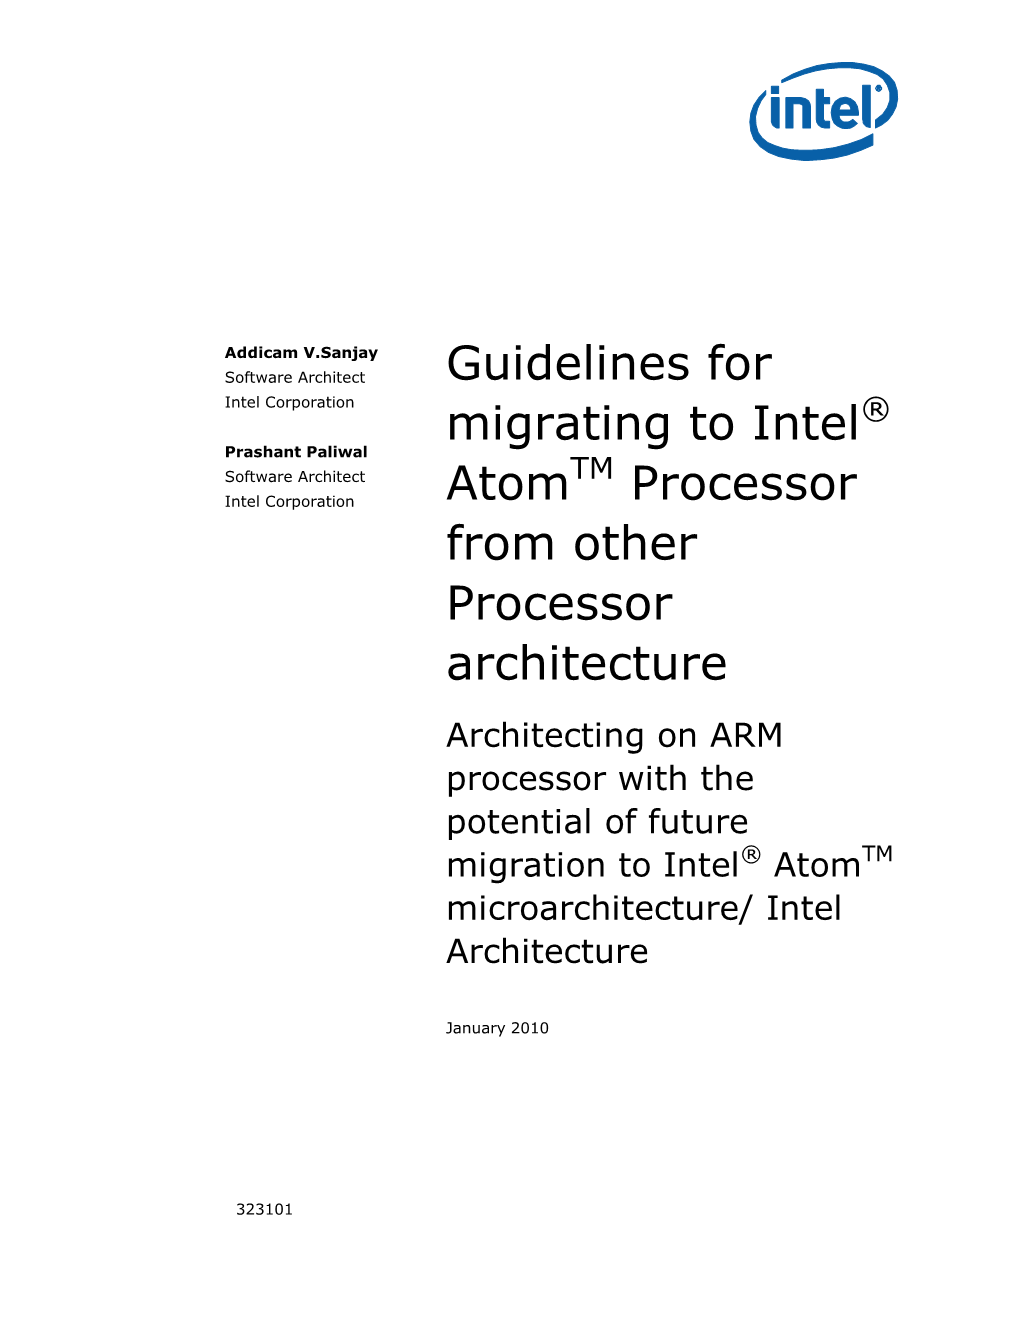 Guidelines for Migrating to Intel(R) Atom(TM) Processor from Other